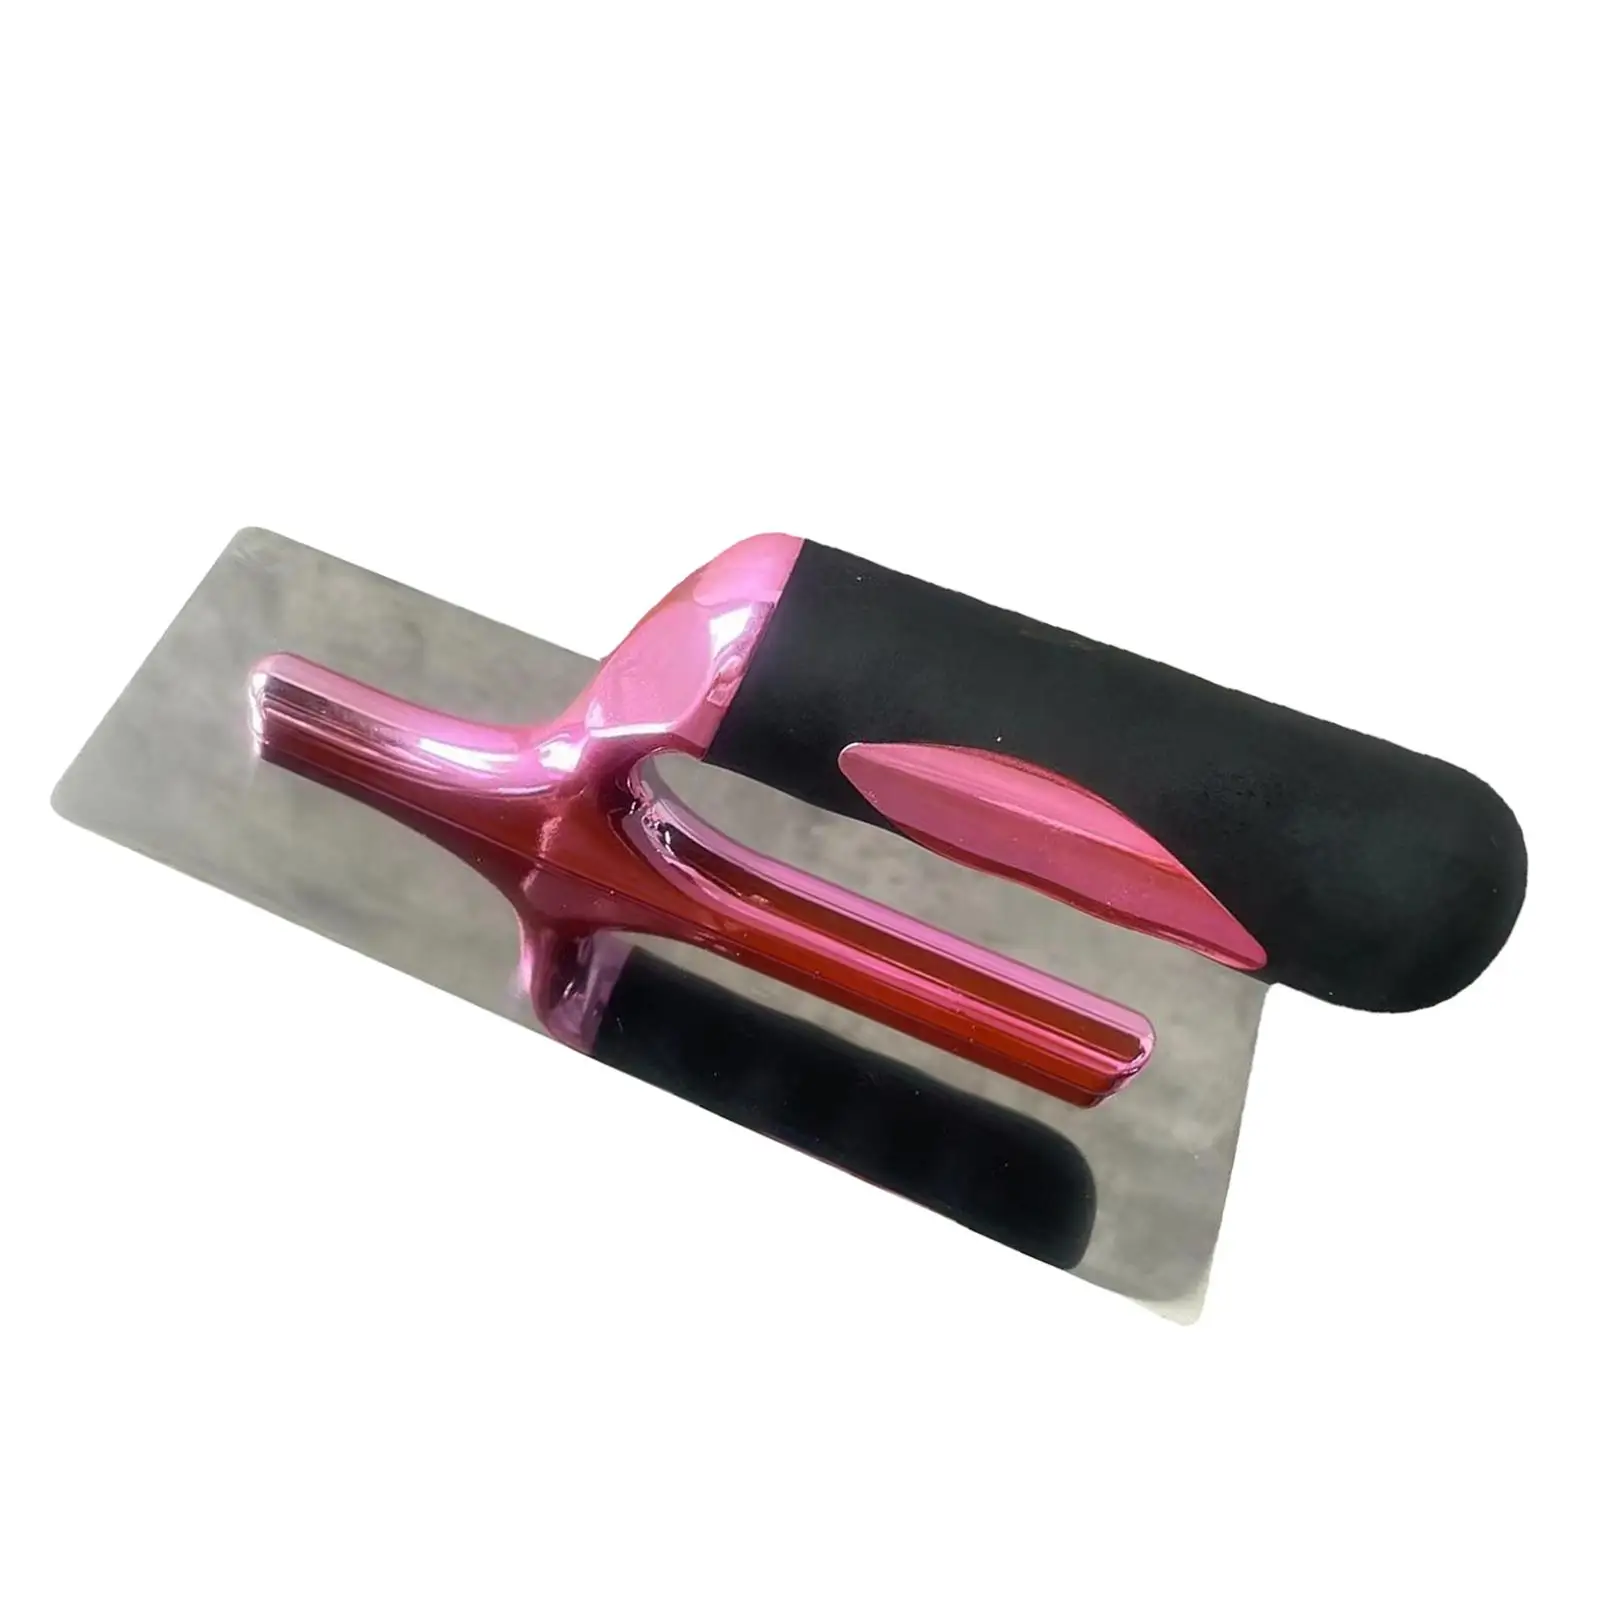 Finishing Trowel Knife Tool Home Construction Tool Hand Tool Stainless Steel Repair Tool Drywall Trowel for Home Decorating